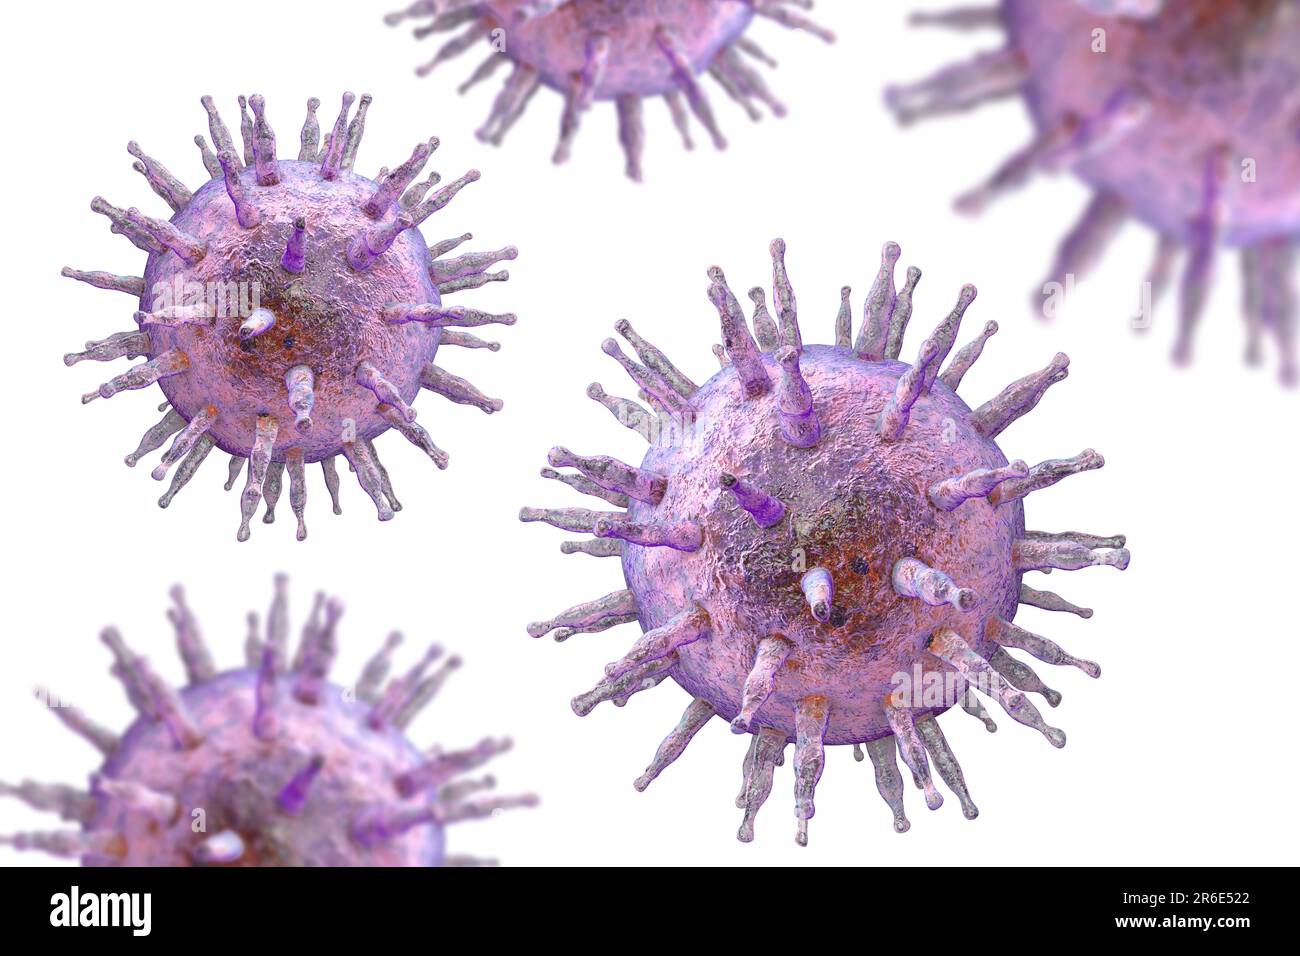 Epstein-Barr virus (EBV), computer illustration. EBV, also known as human herpes virus 4, is 1 of 8 herpes viruses that infects humans. It is best kno Stock Photo